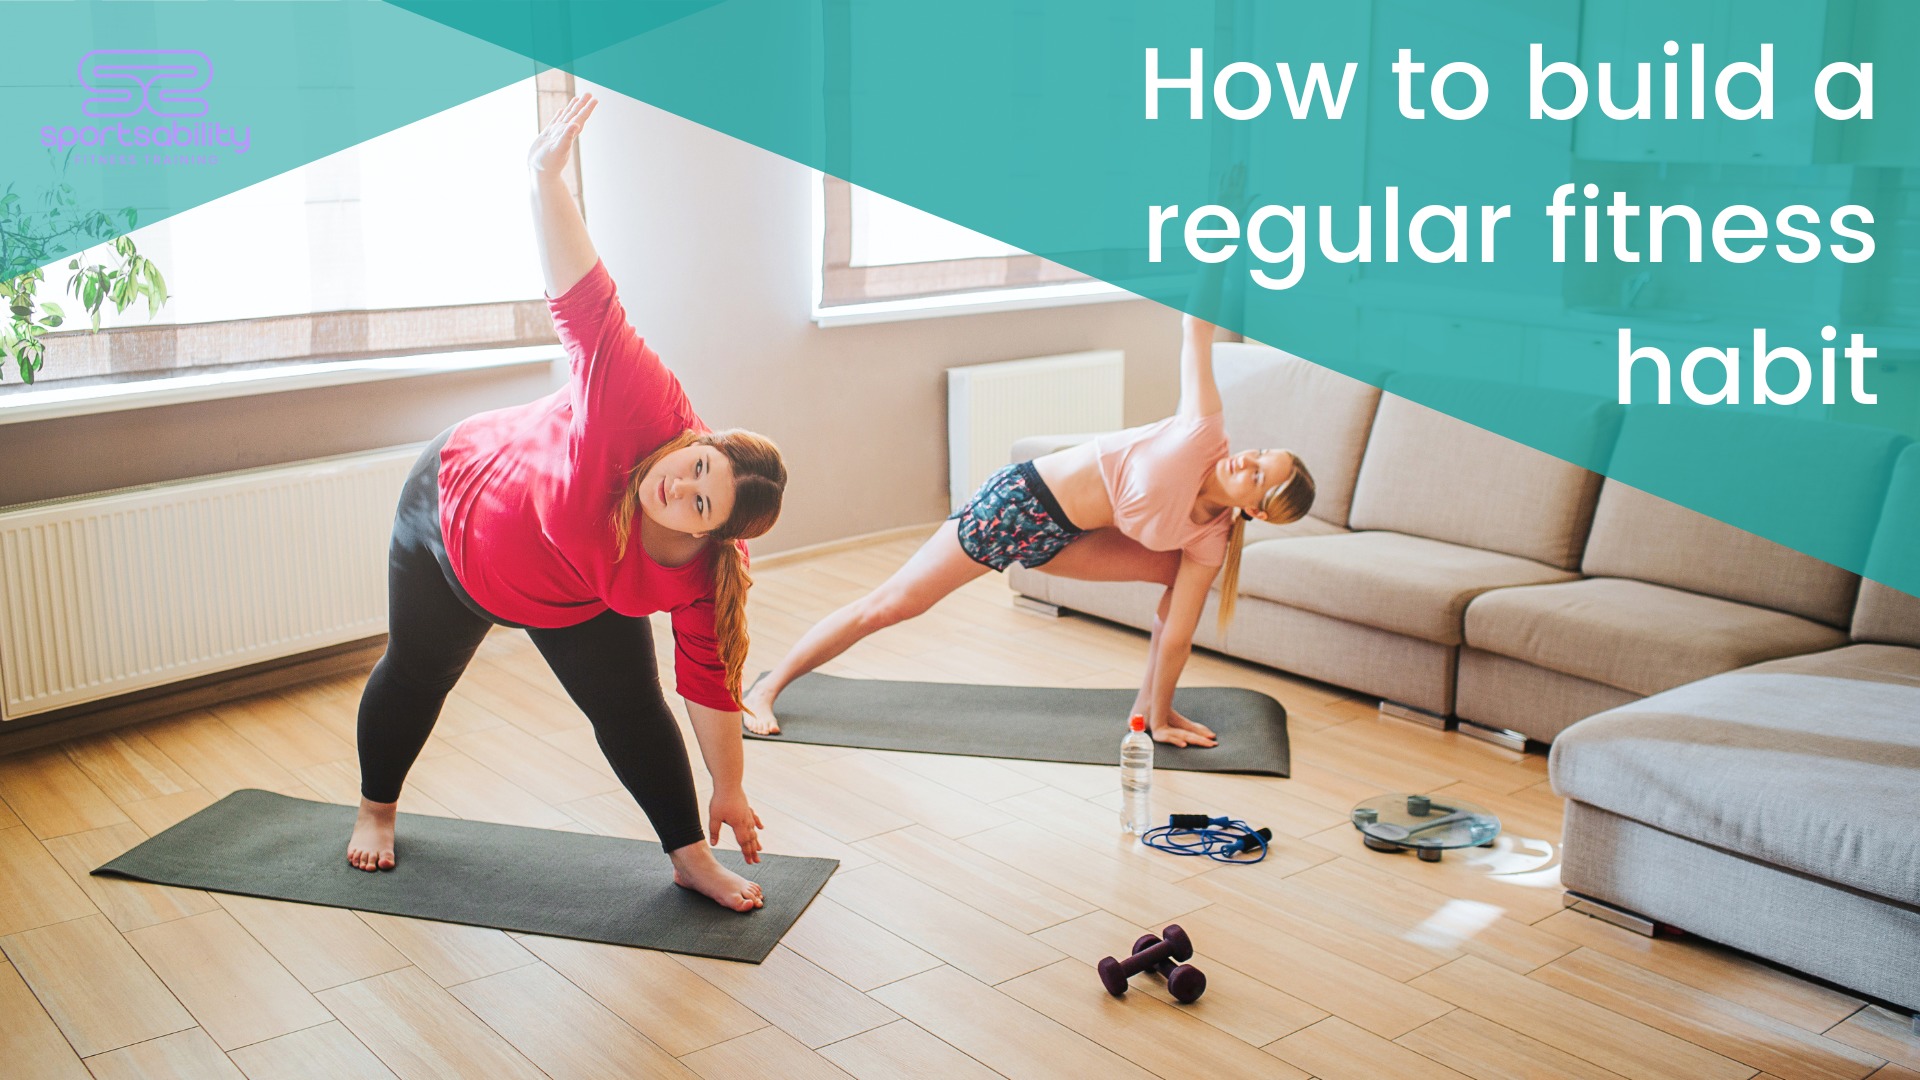 How to build a regular fitness habit